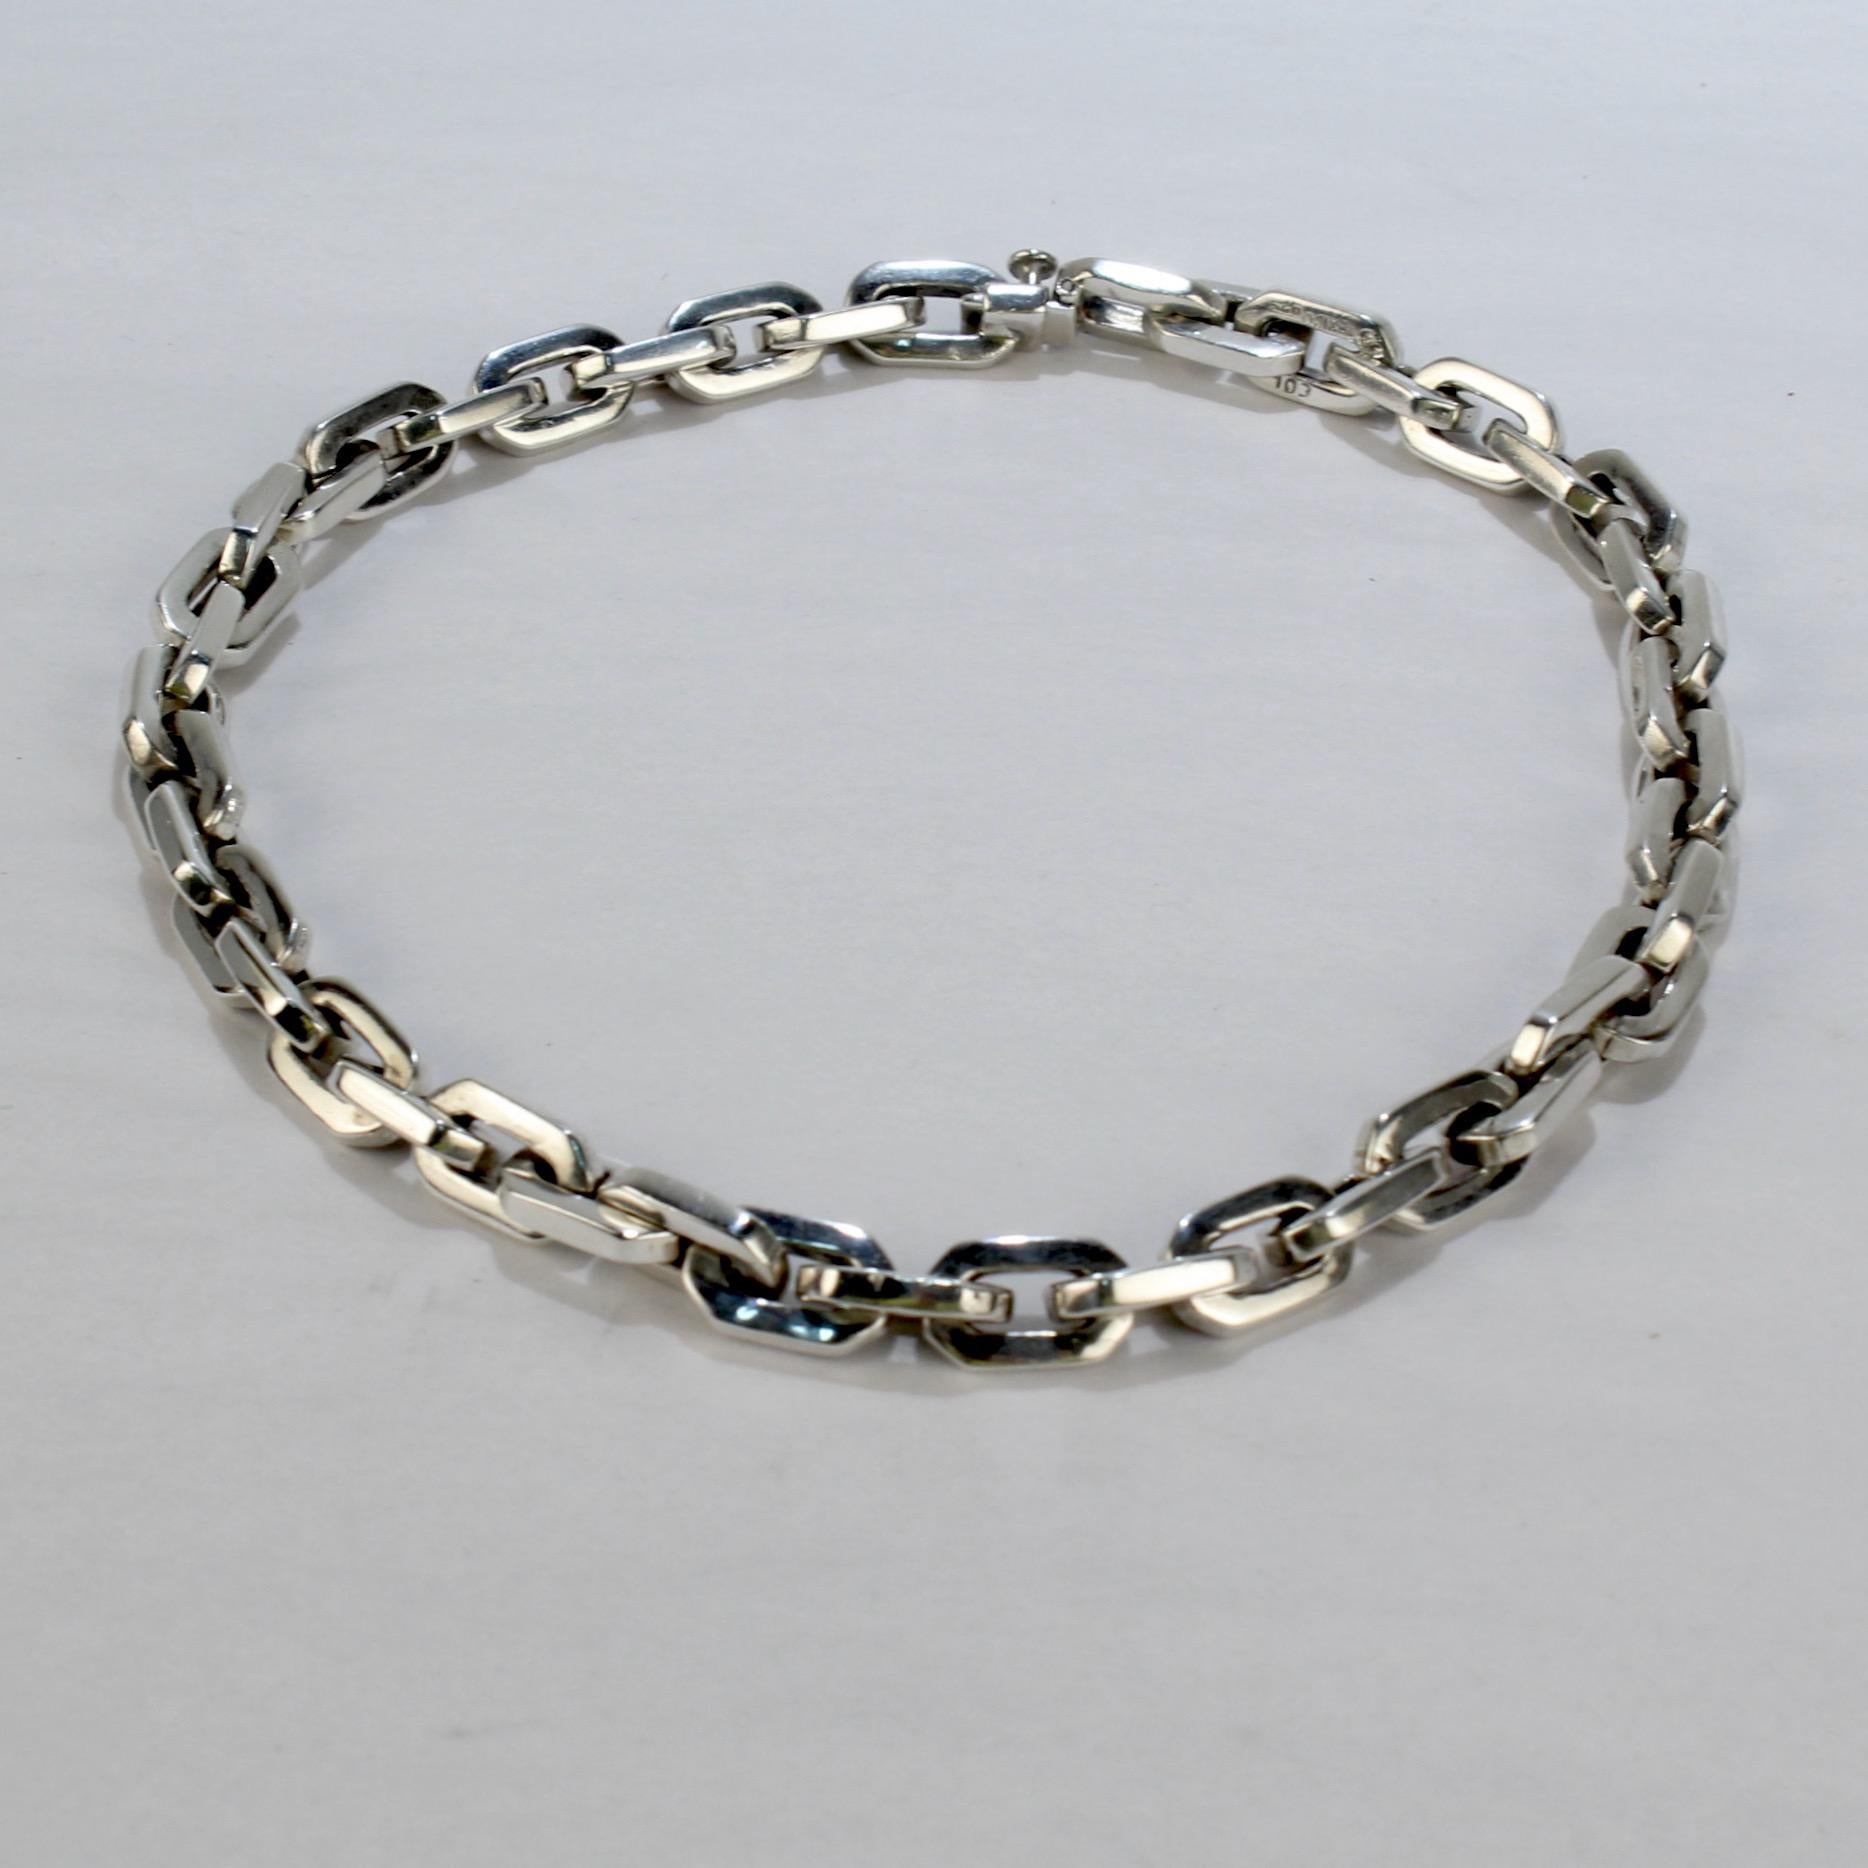 Heavy Mexican Sterling Silver Hexagonal Cable Dog Chain Link Choker Necklace In Good Condition For Sale In Philadelphia, PA